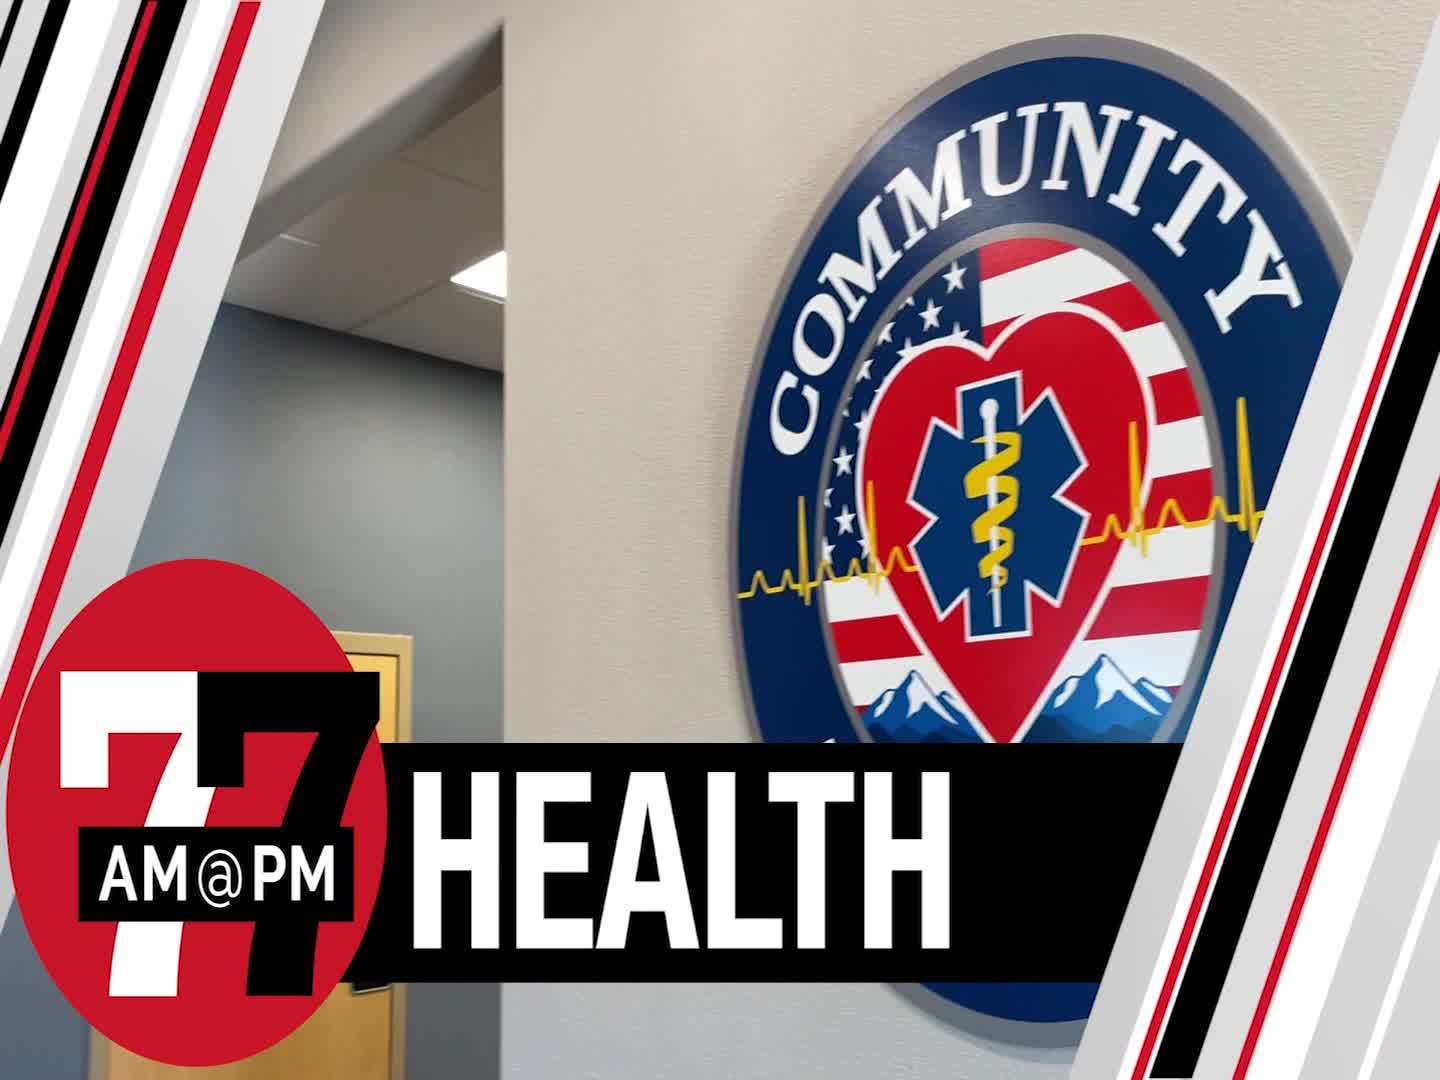 Hands-on emergency training at Community Ambulance’s new health center